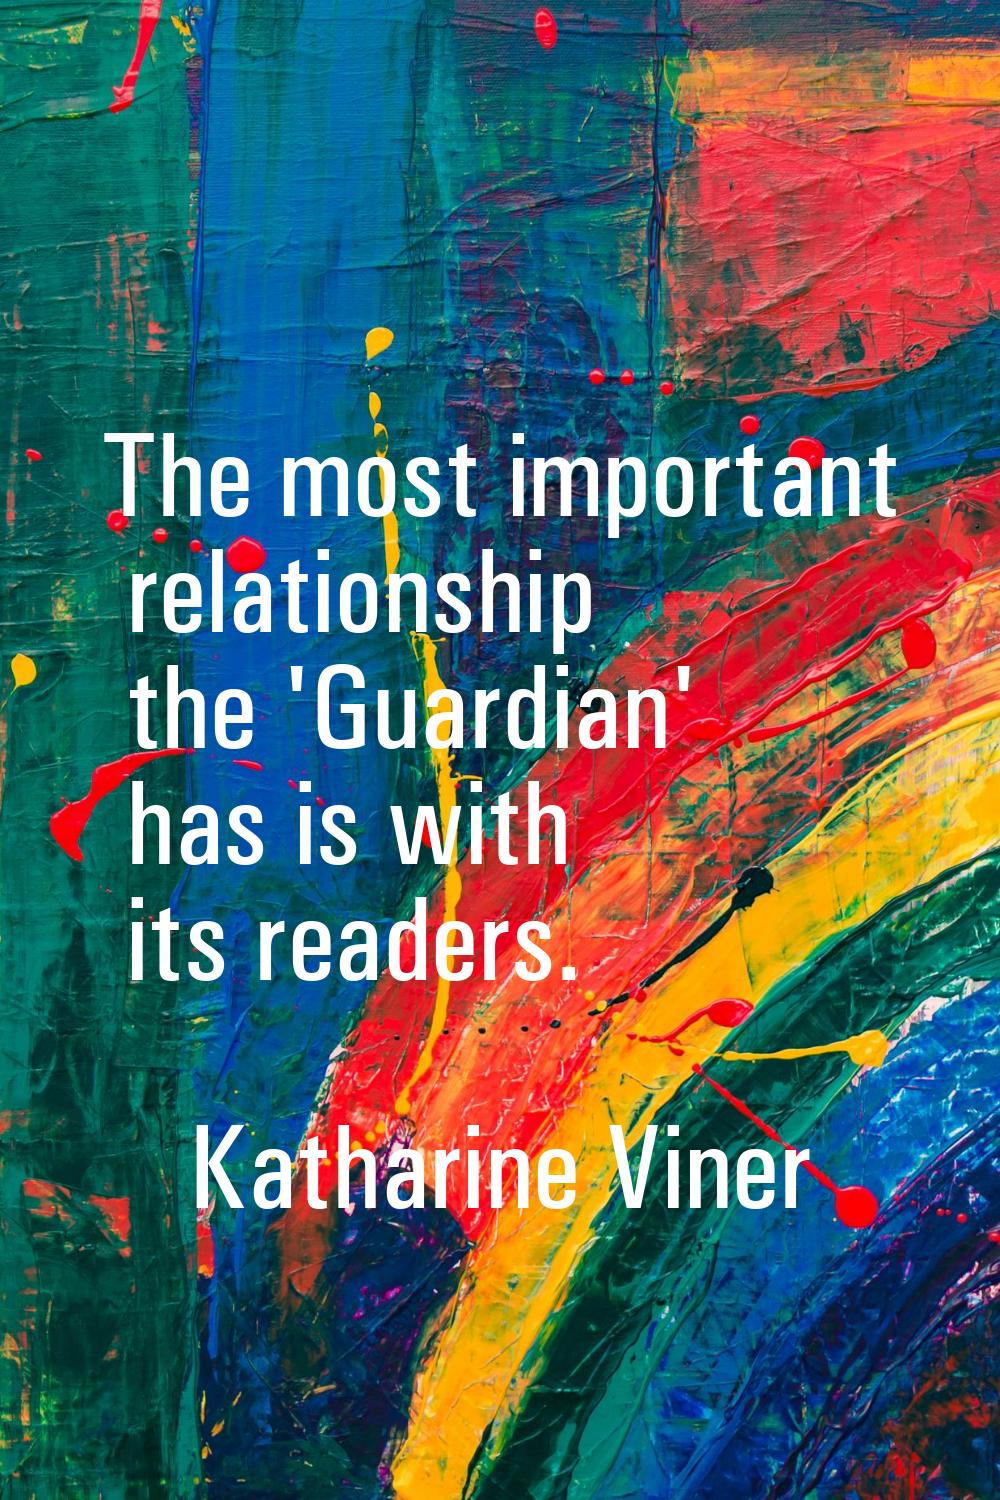 The most important relationship the 'Guardian' has is with its readers.